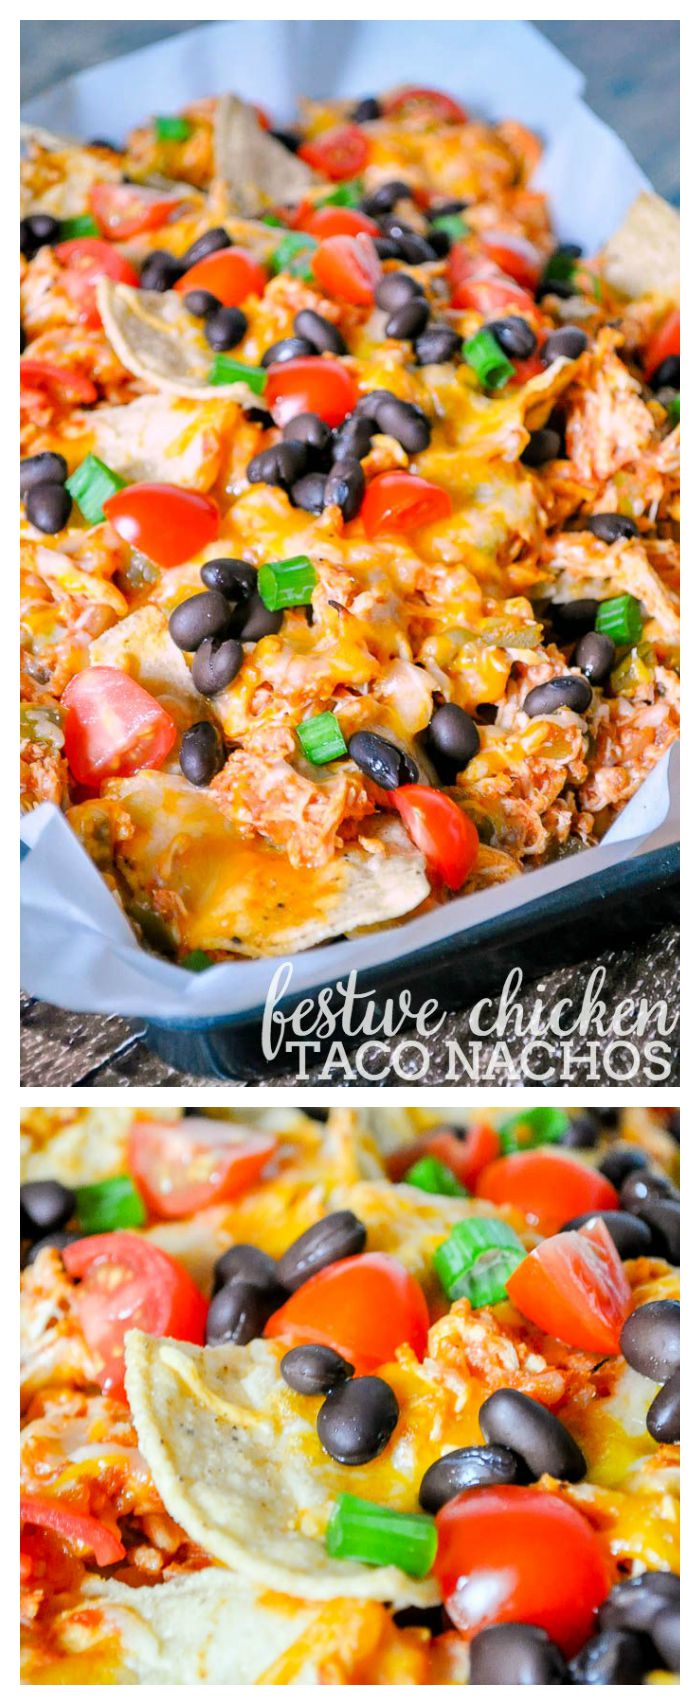 Festive Chicken Taco Nachos - An addictive recipe for parties or Game Day that can be ready in just 15 minutes! | The Love Nerds #StockUpOnPace #JewelOsco #ad 